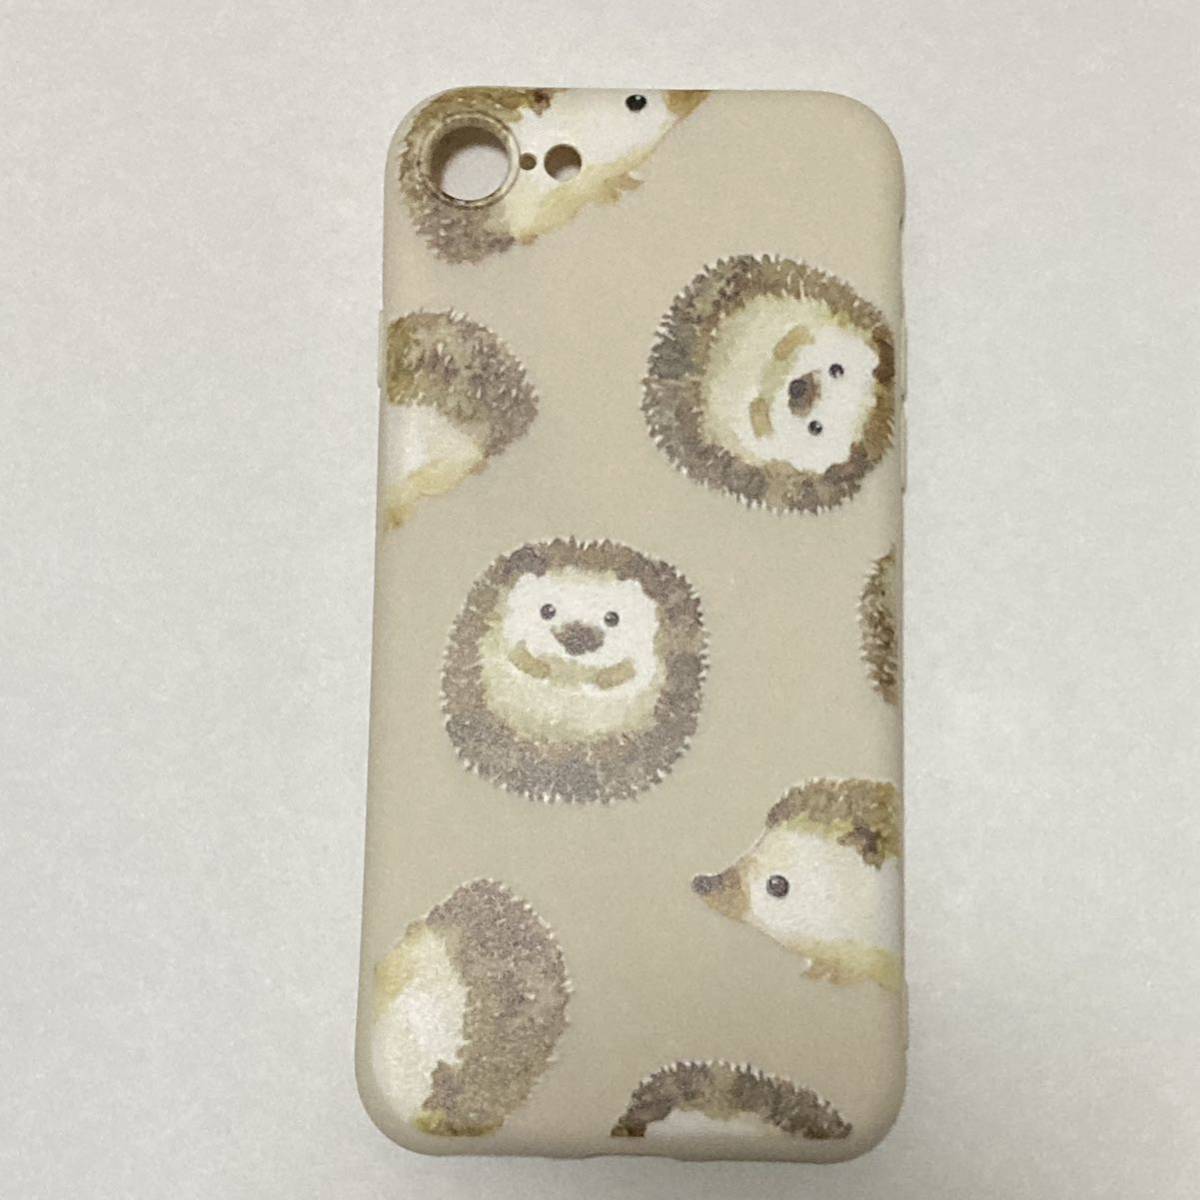  new goods iphone case 7/8/SE2.3 for hedgehog. lovely smartphone case animal small animals mouse illustration white silicon case 